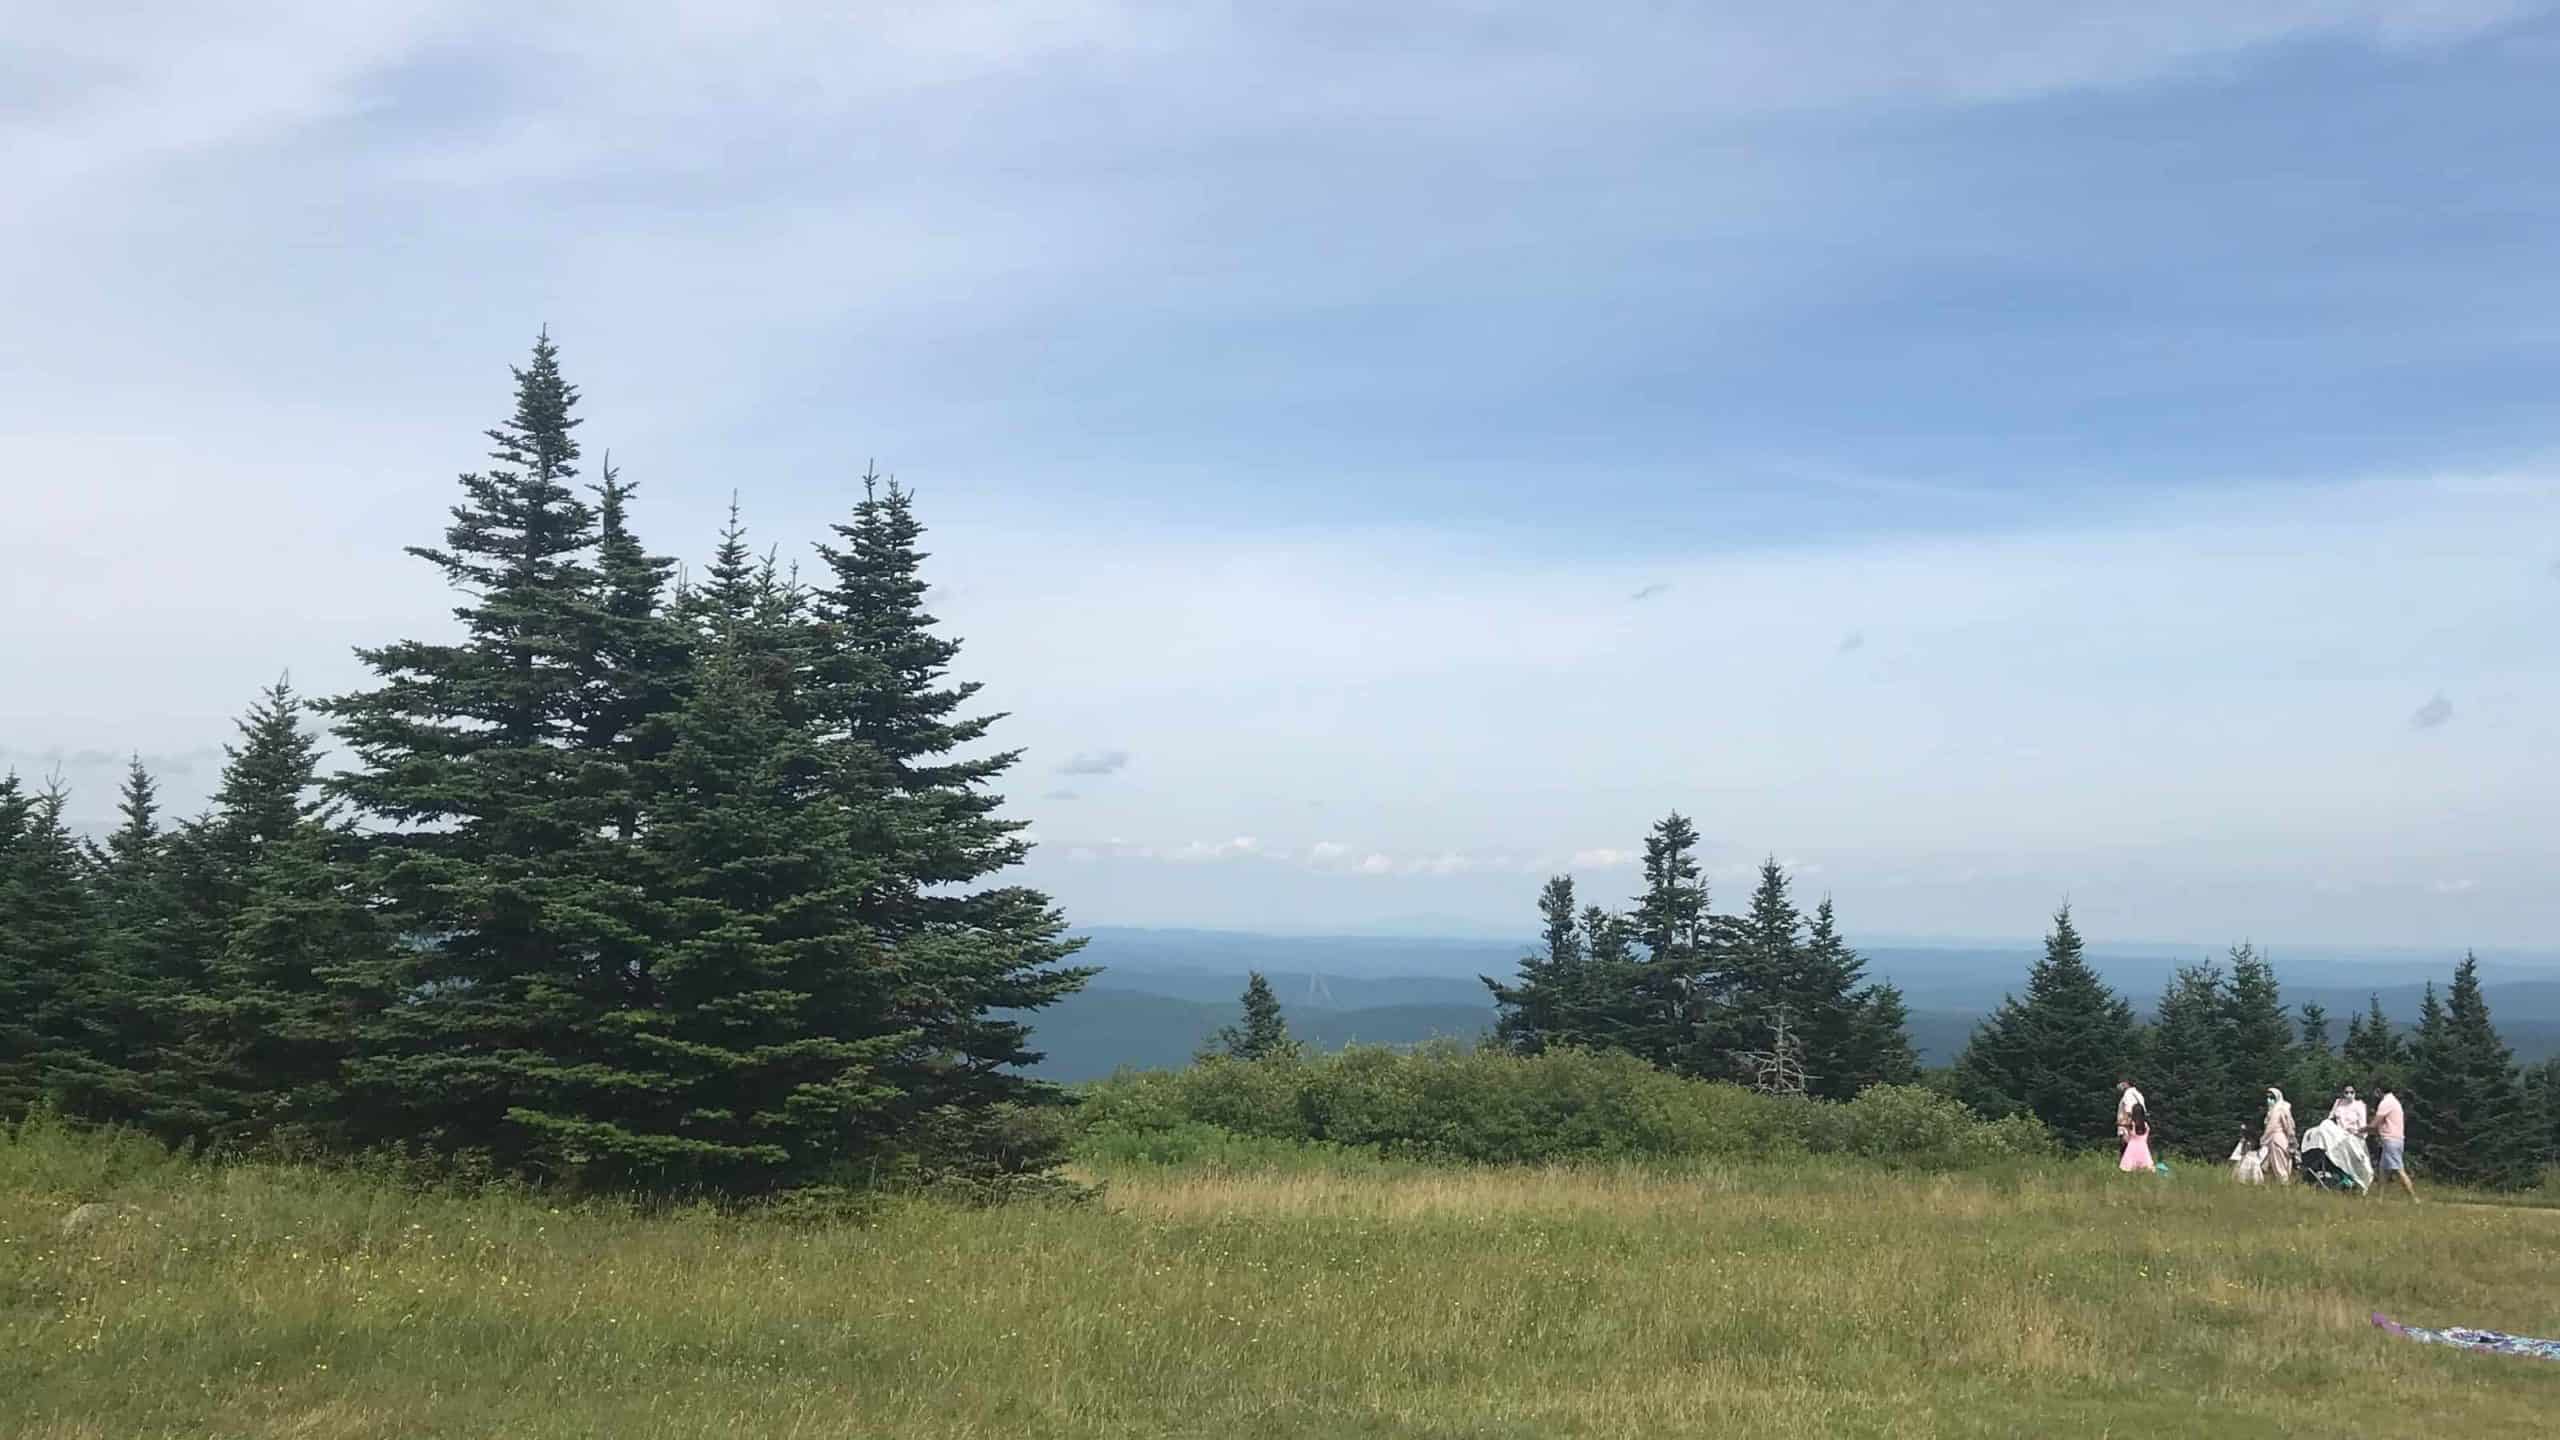 At it highest peak, Mount Greylock offers a long view from the high meadow among spruce and fir trees.